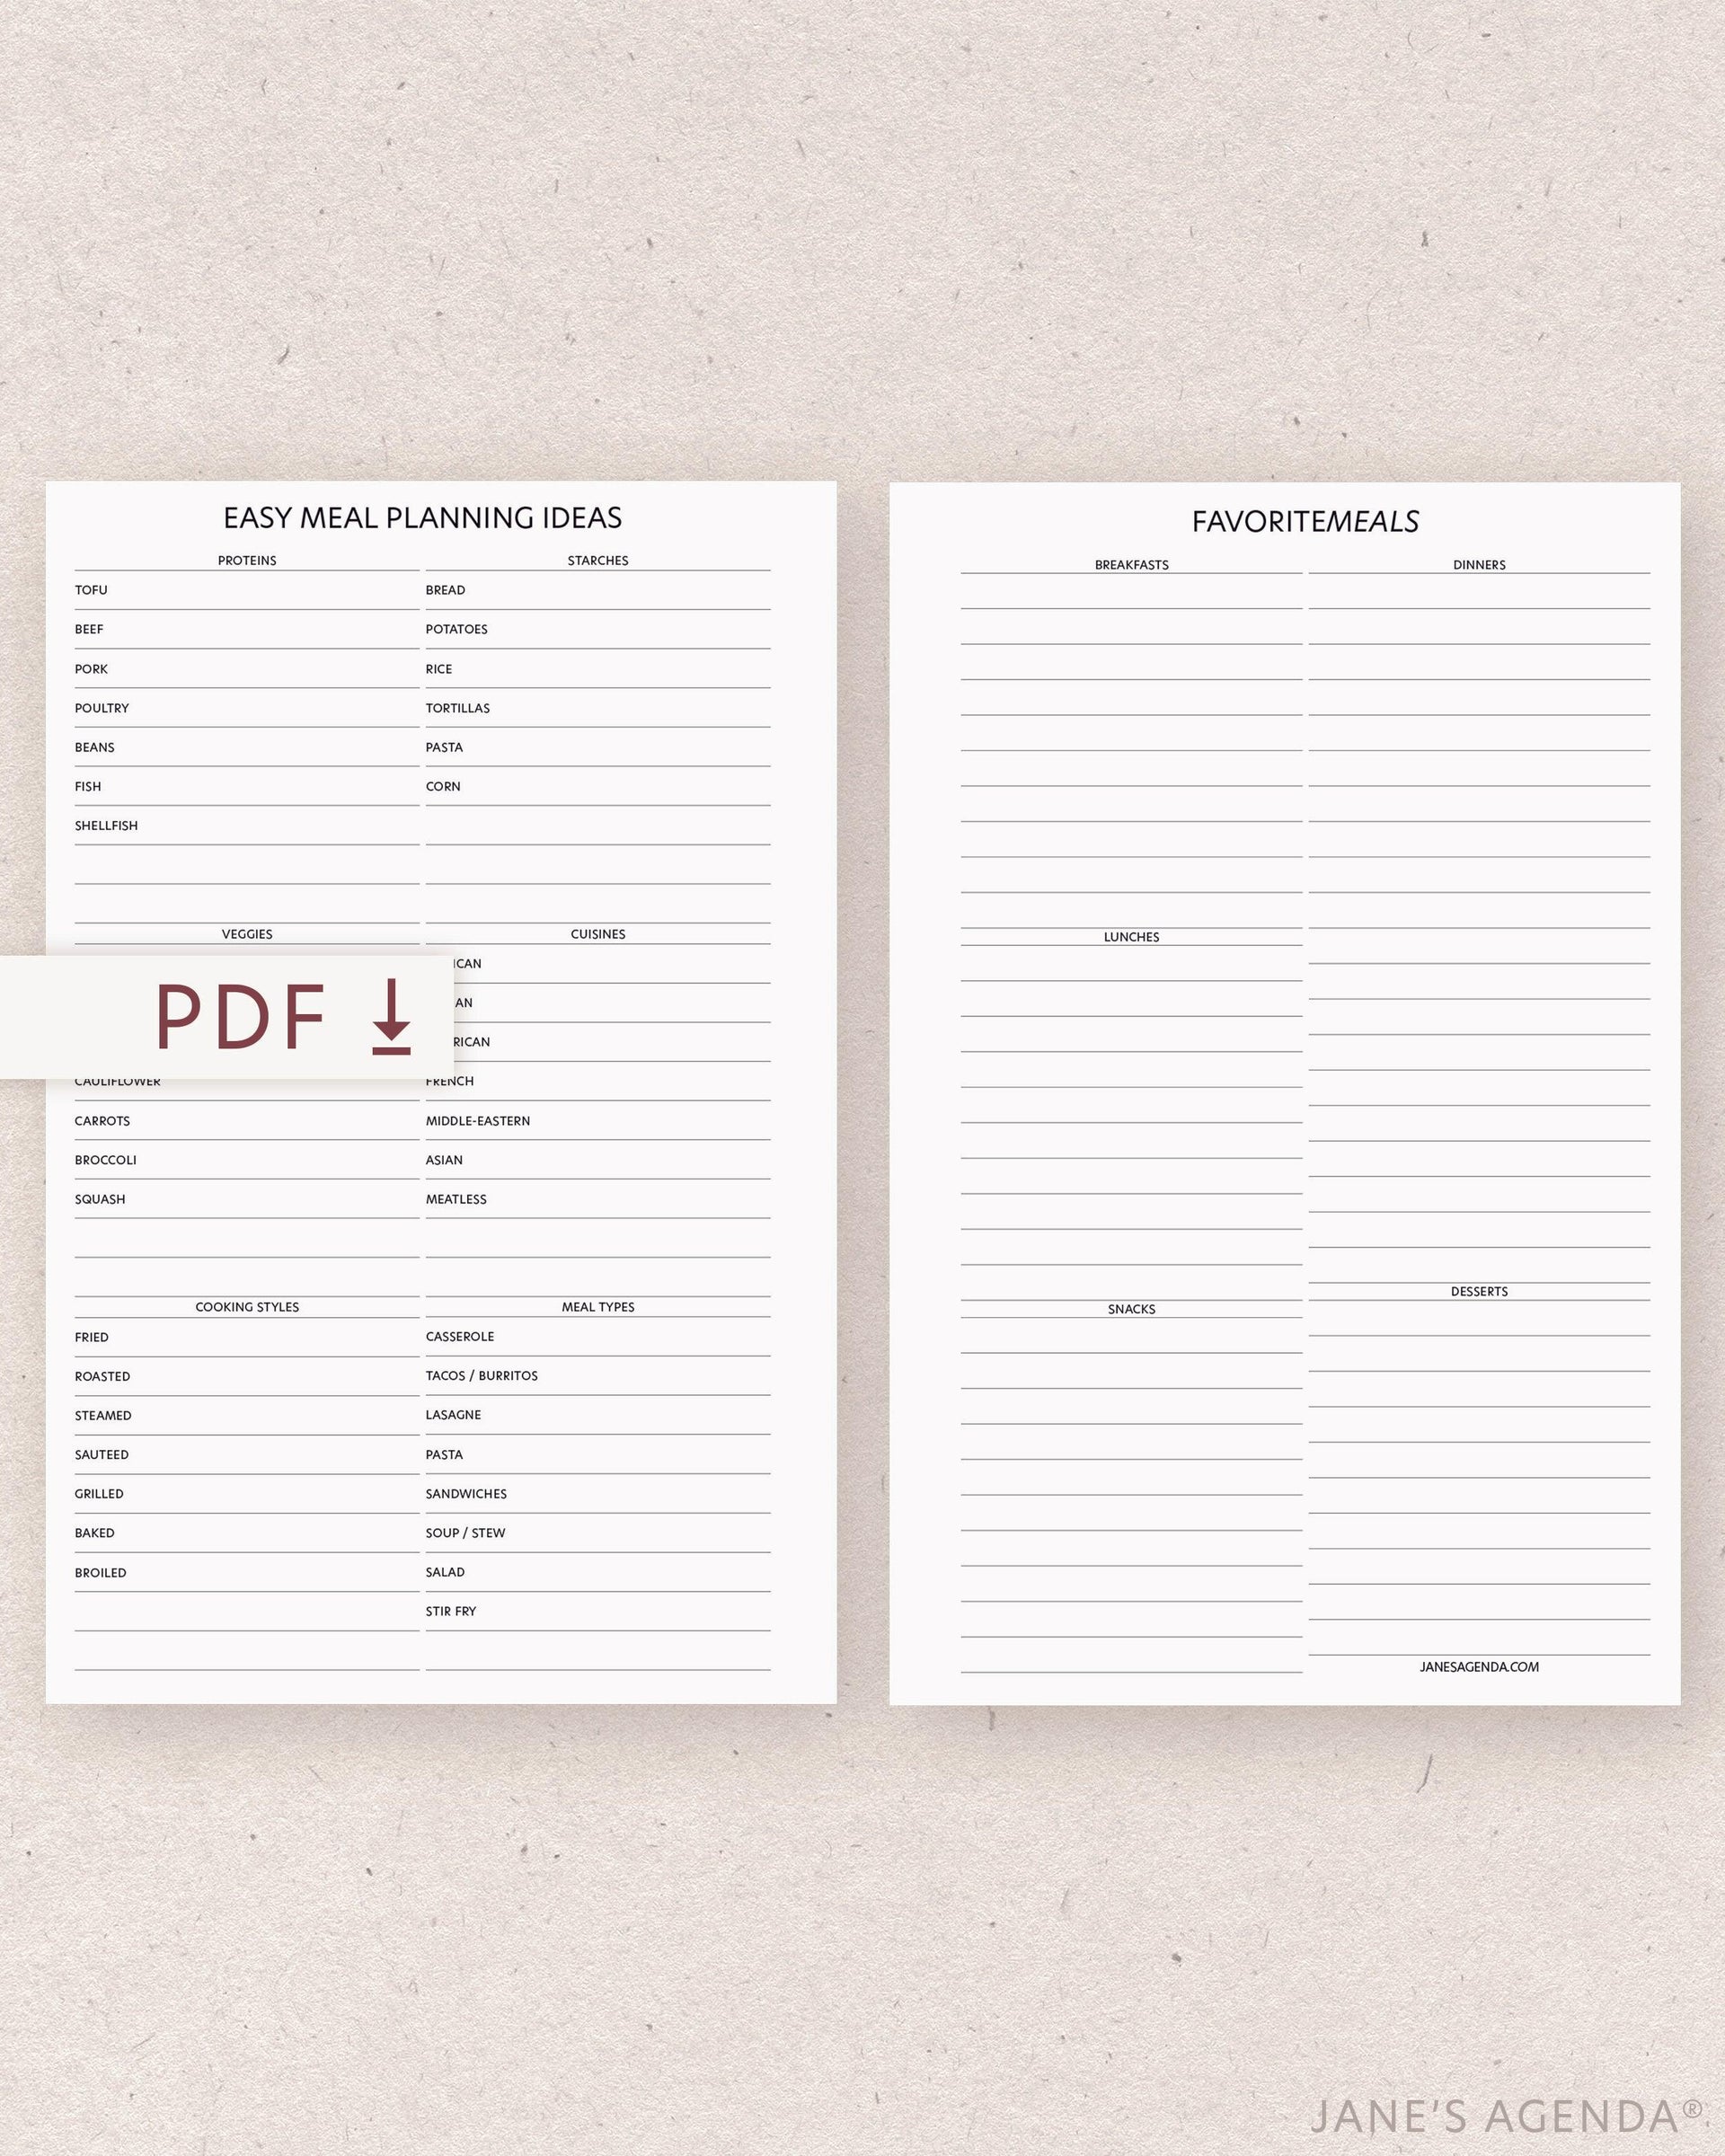 Printable Monthly Meal Planning Planner Inserts by Jane's Agenda.